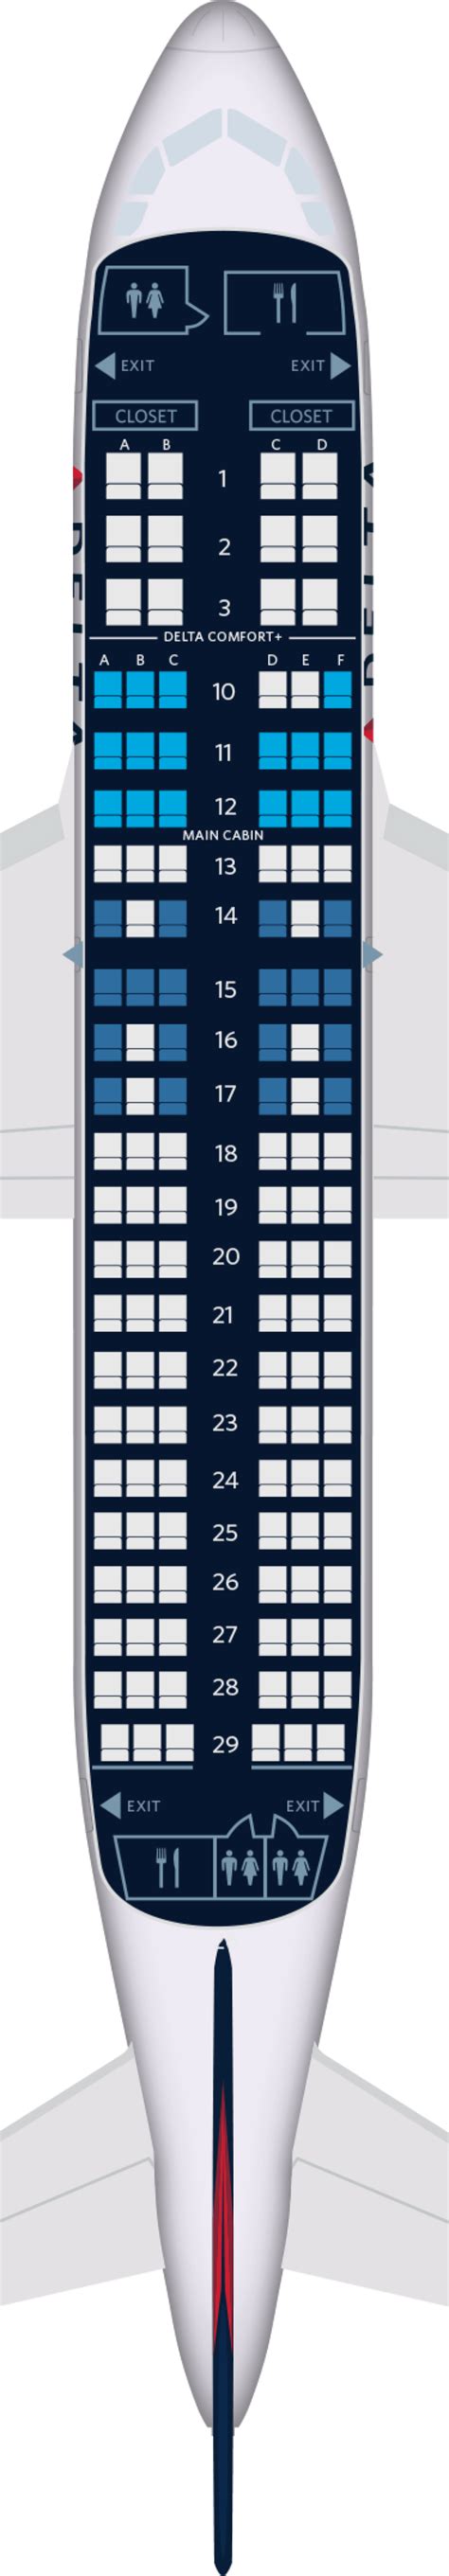 Frontier Airlines Airbus A319 Seating Chart Review Home Decor